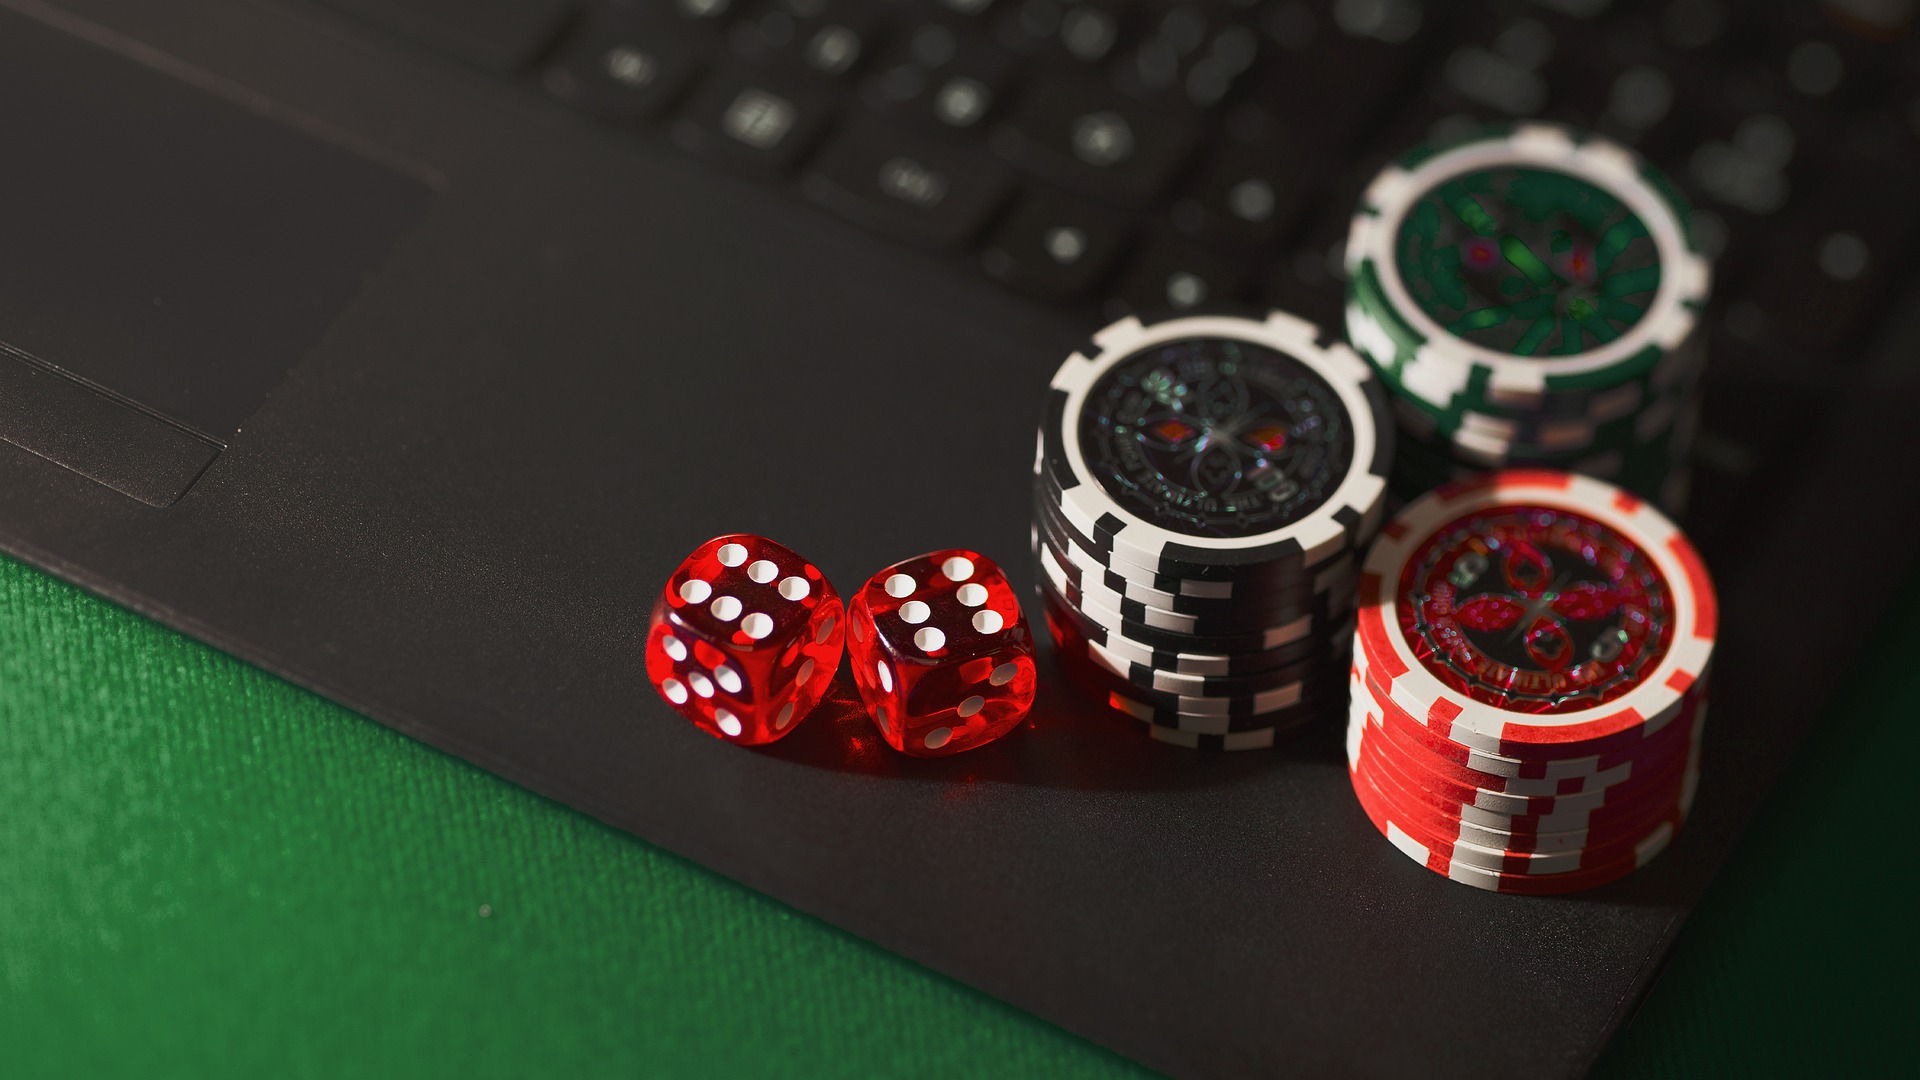 The best ways to Find Credible Online Casinos